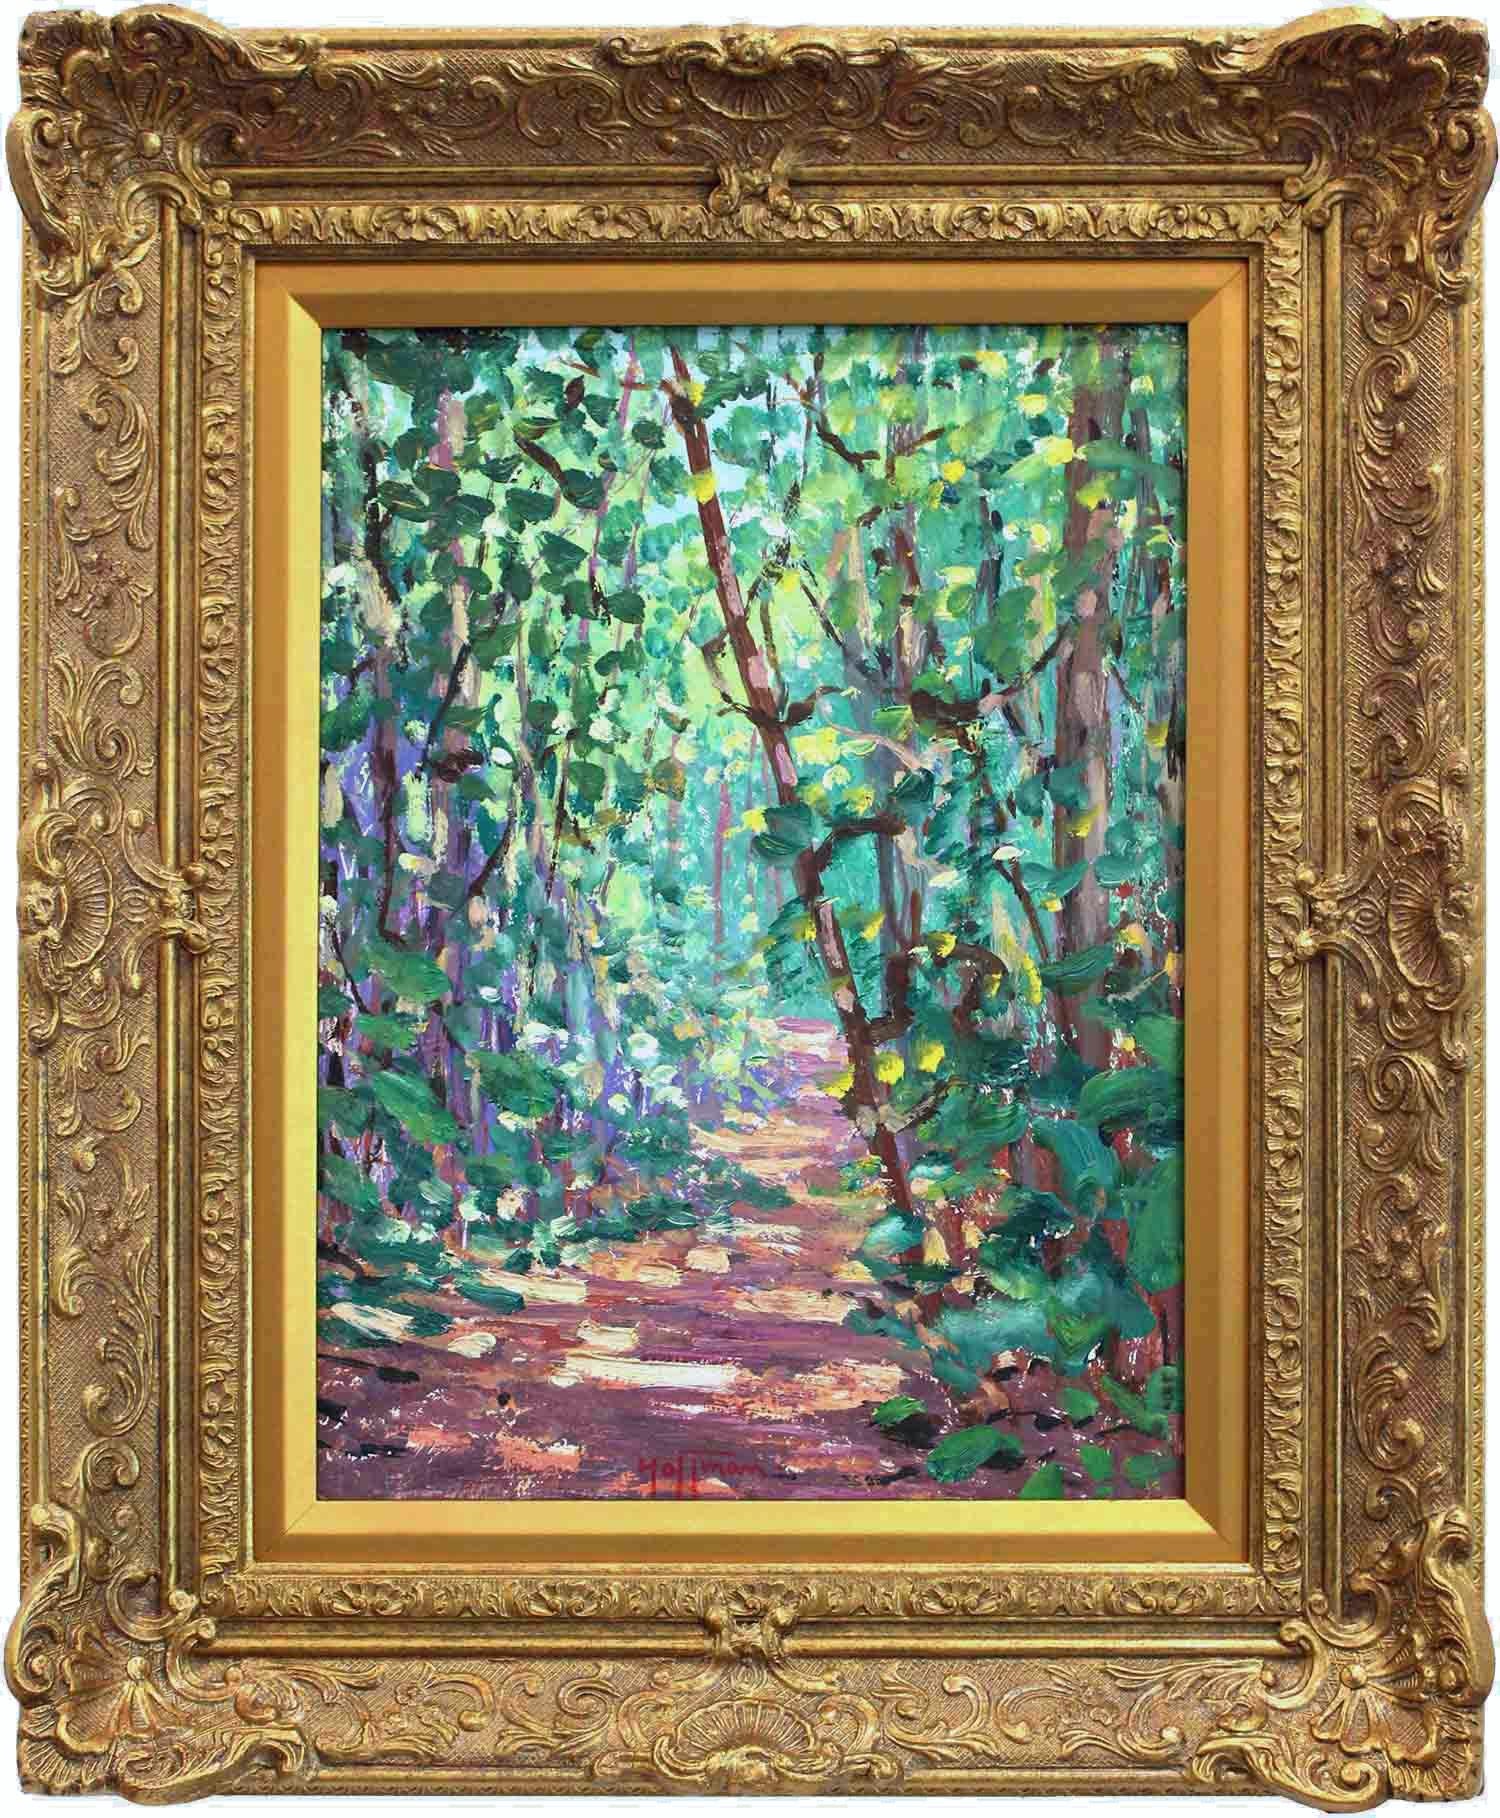 Harry Leslie Hoffman Landscape Painting - "A Trail in the Jungle - Kartabo, British Guiana" Impressionist Oil Painting